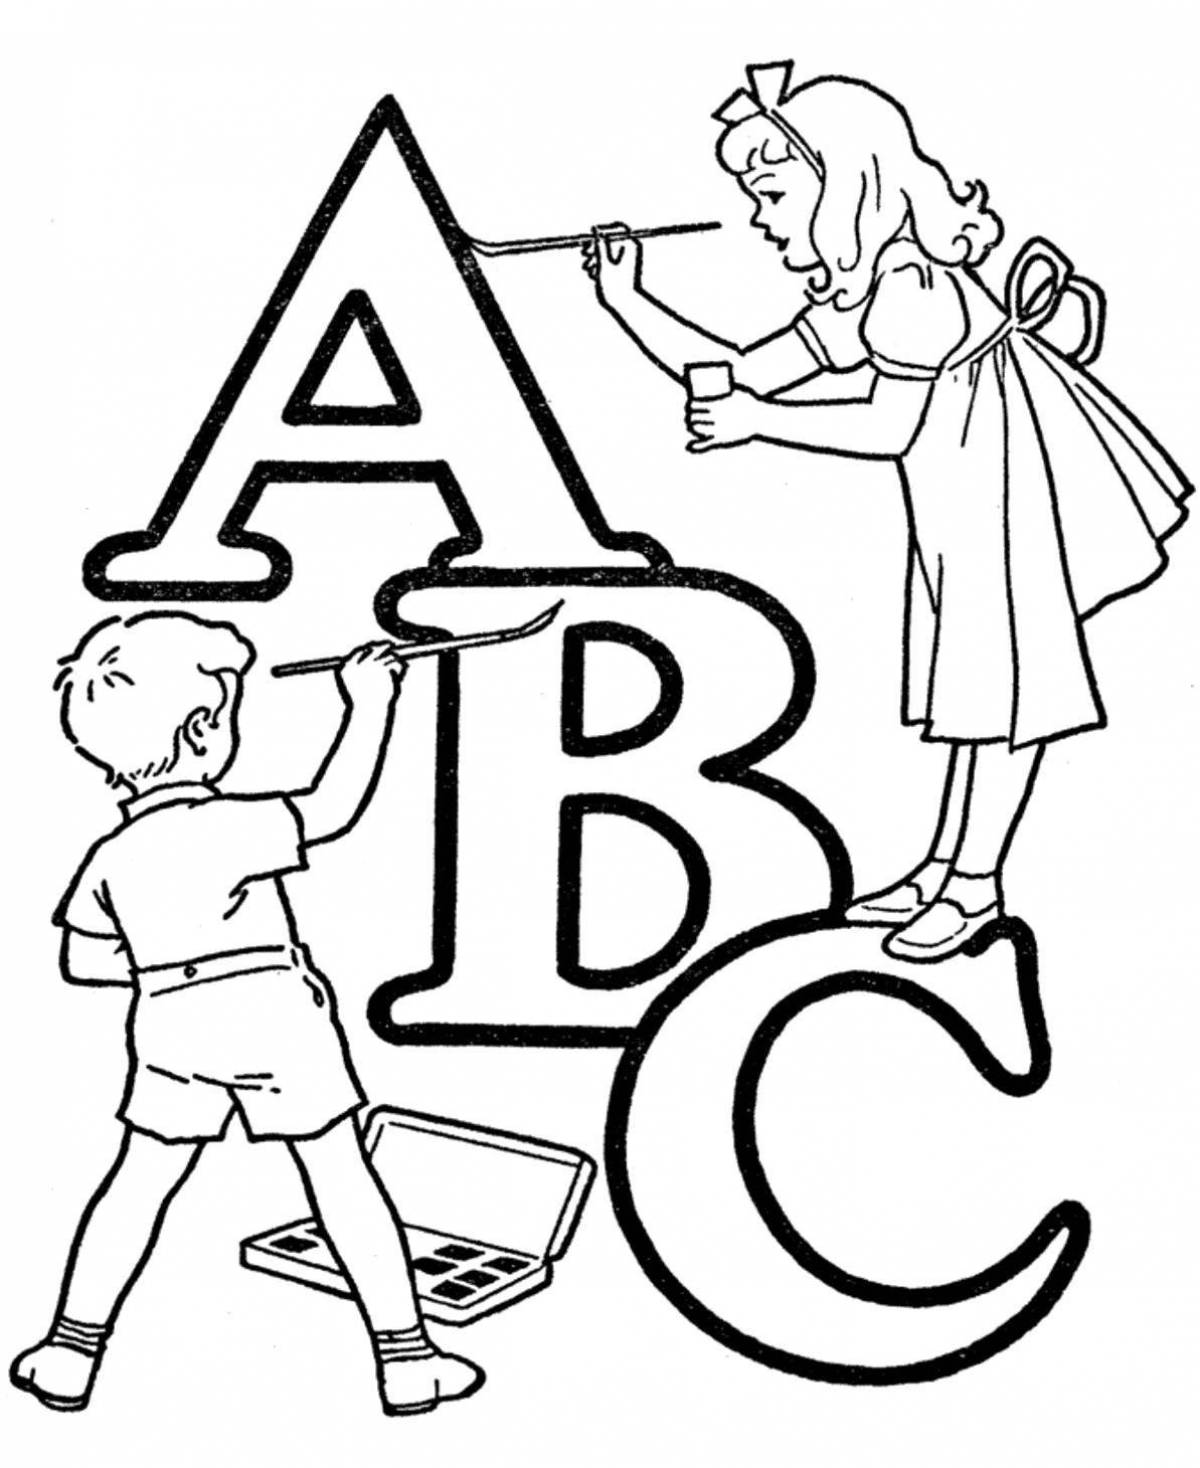 Colourful coloring of the English alphabet for juniors